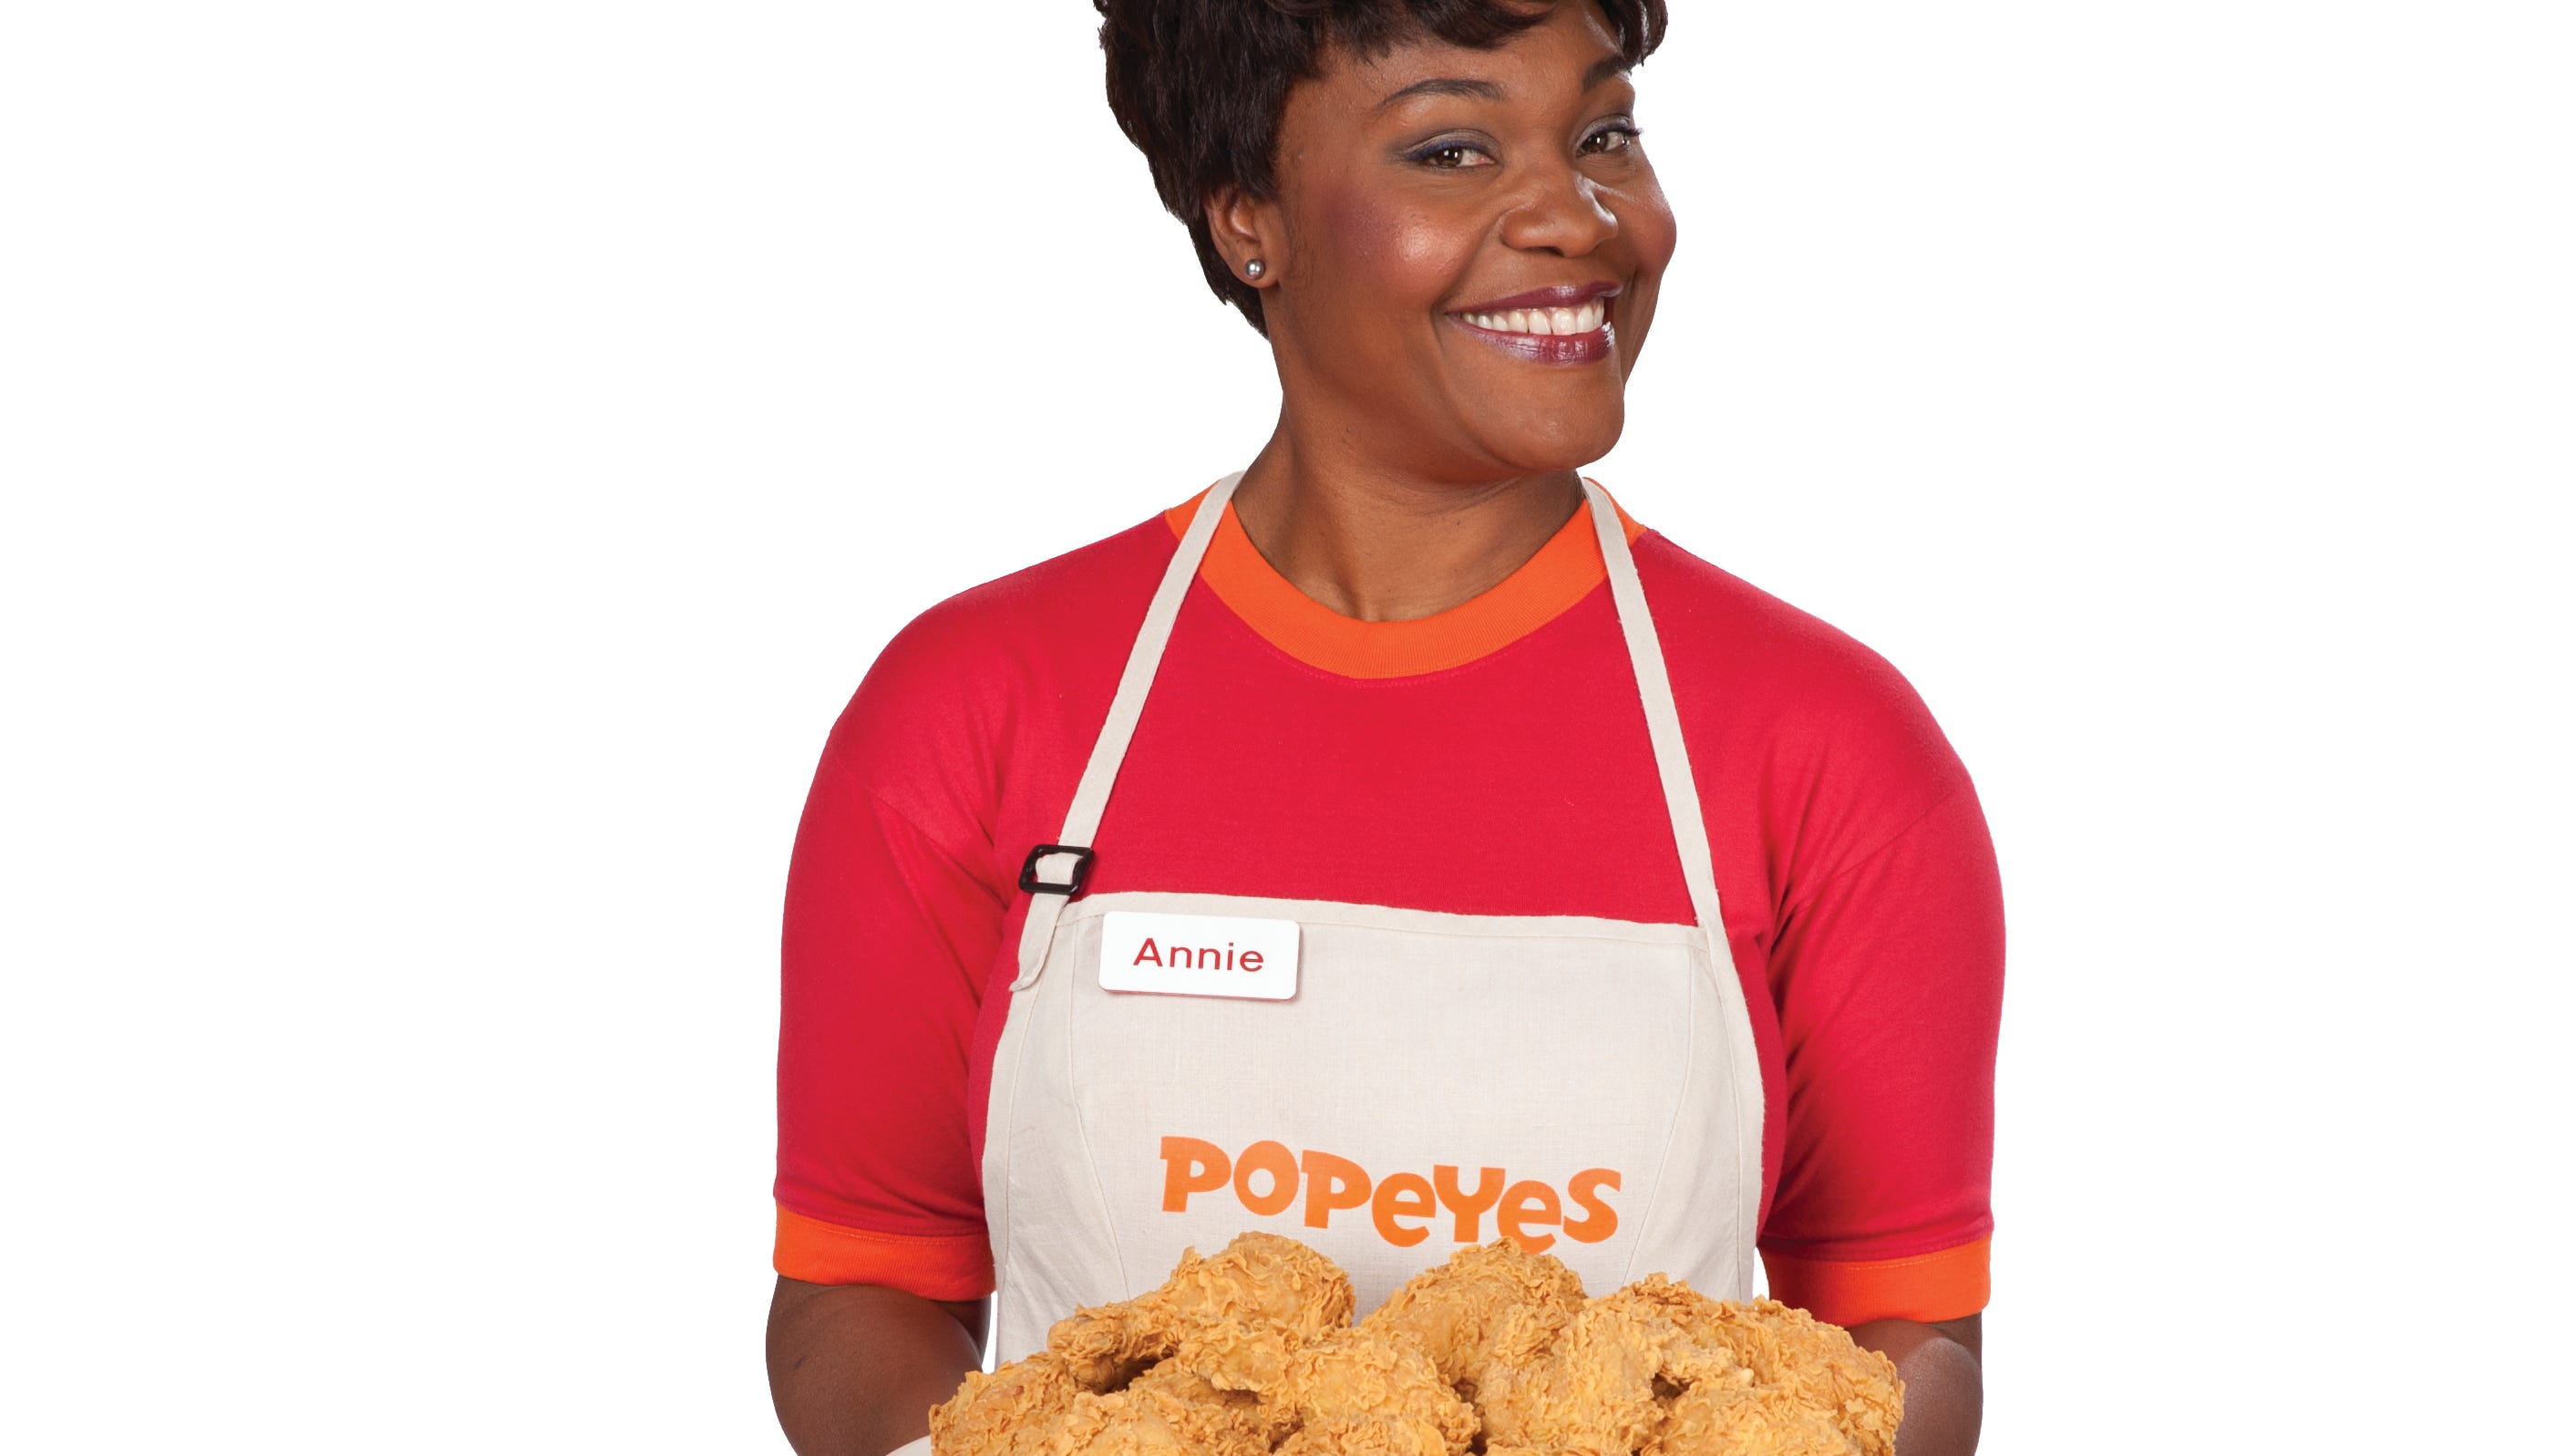 Where is the famous Popeye's lady?